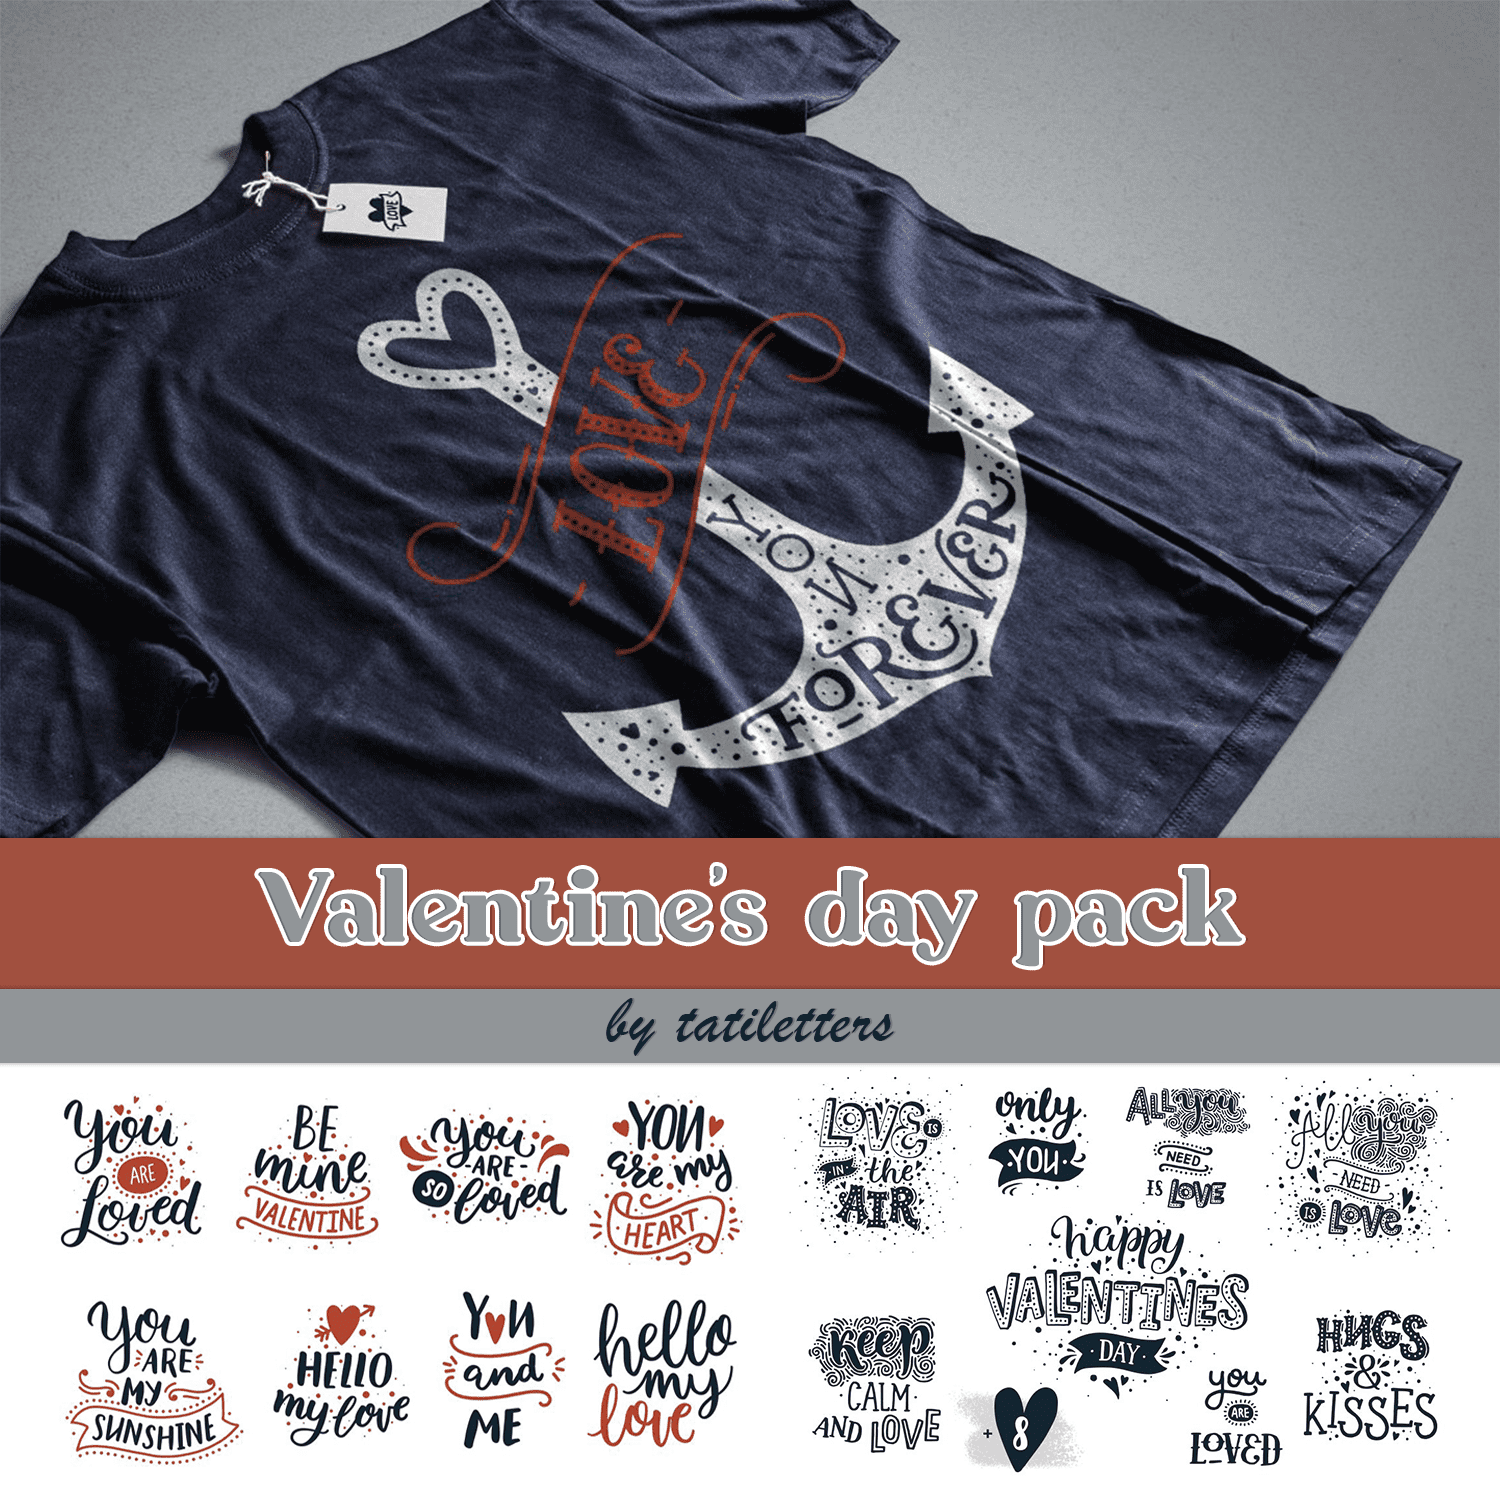 Valentine's Day Pack Cover.